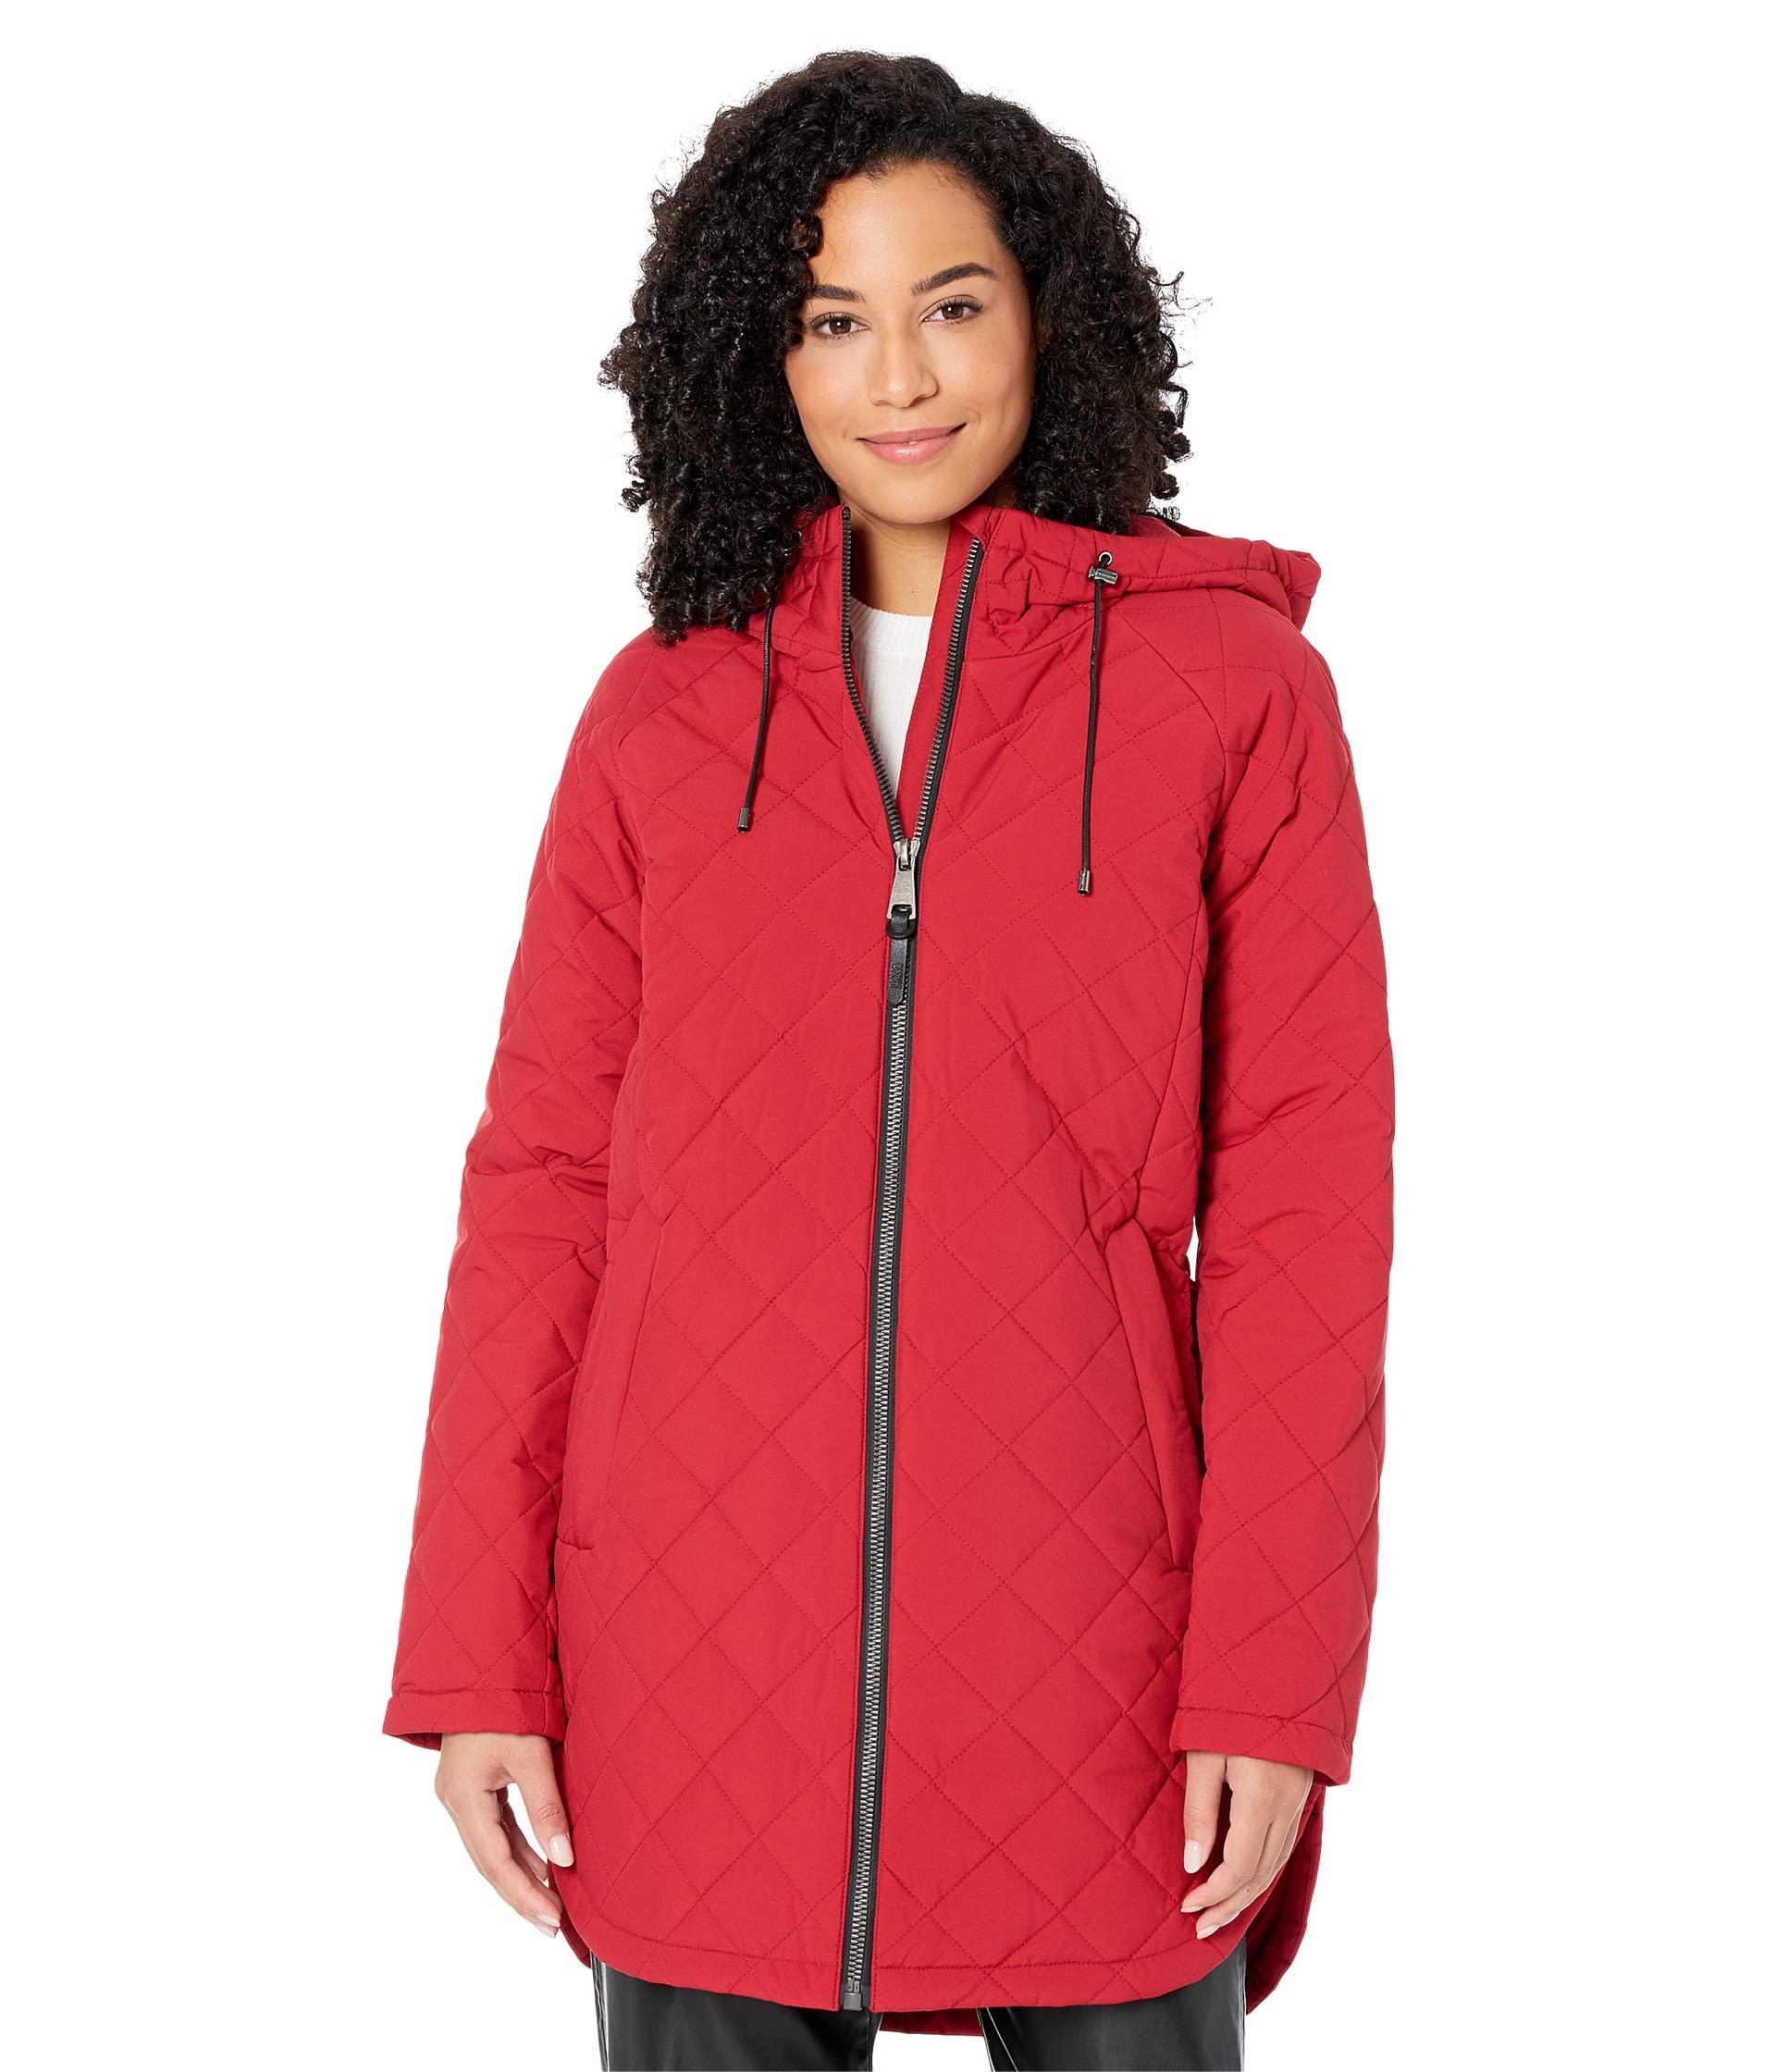 DKNY Diamond Quilt Jacket in Red | Lyst